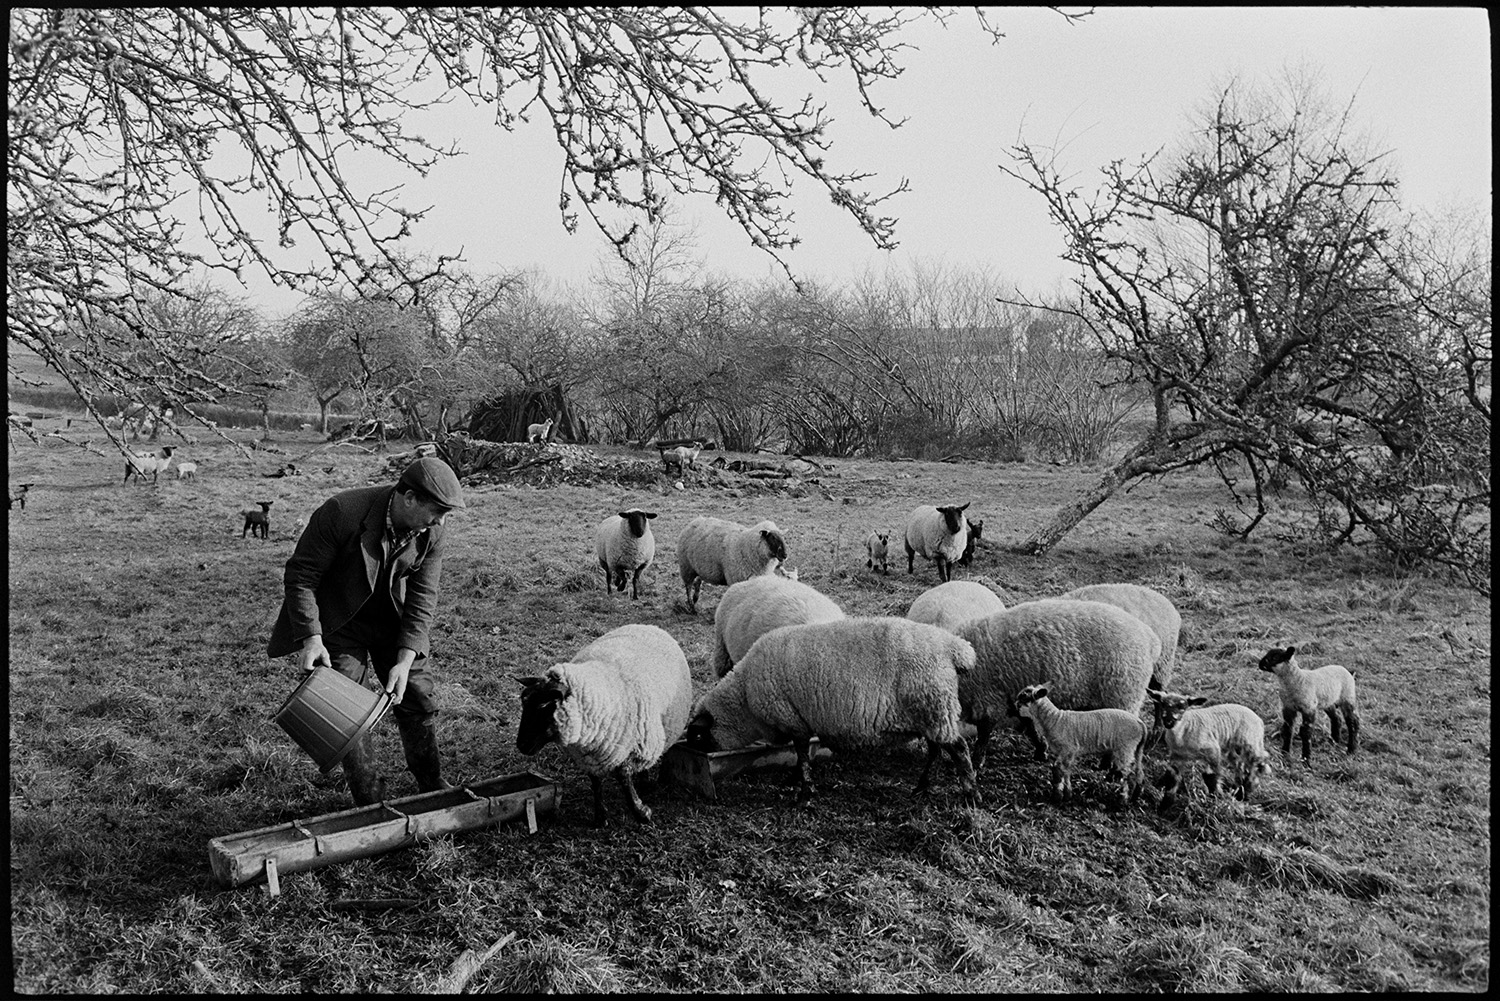 Sheep in orchard with logs and woodpile, farmer feeding sheep.
[Morley King feeding sheep and lambs in an orchard at Middle Week, Iddesleigh. He is pouring feed from a plastic bucket into a metal trough. Apple trees and a woodpile can be seen in the background.]